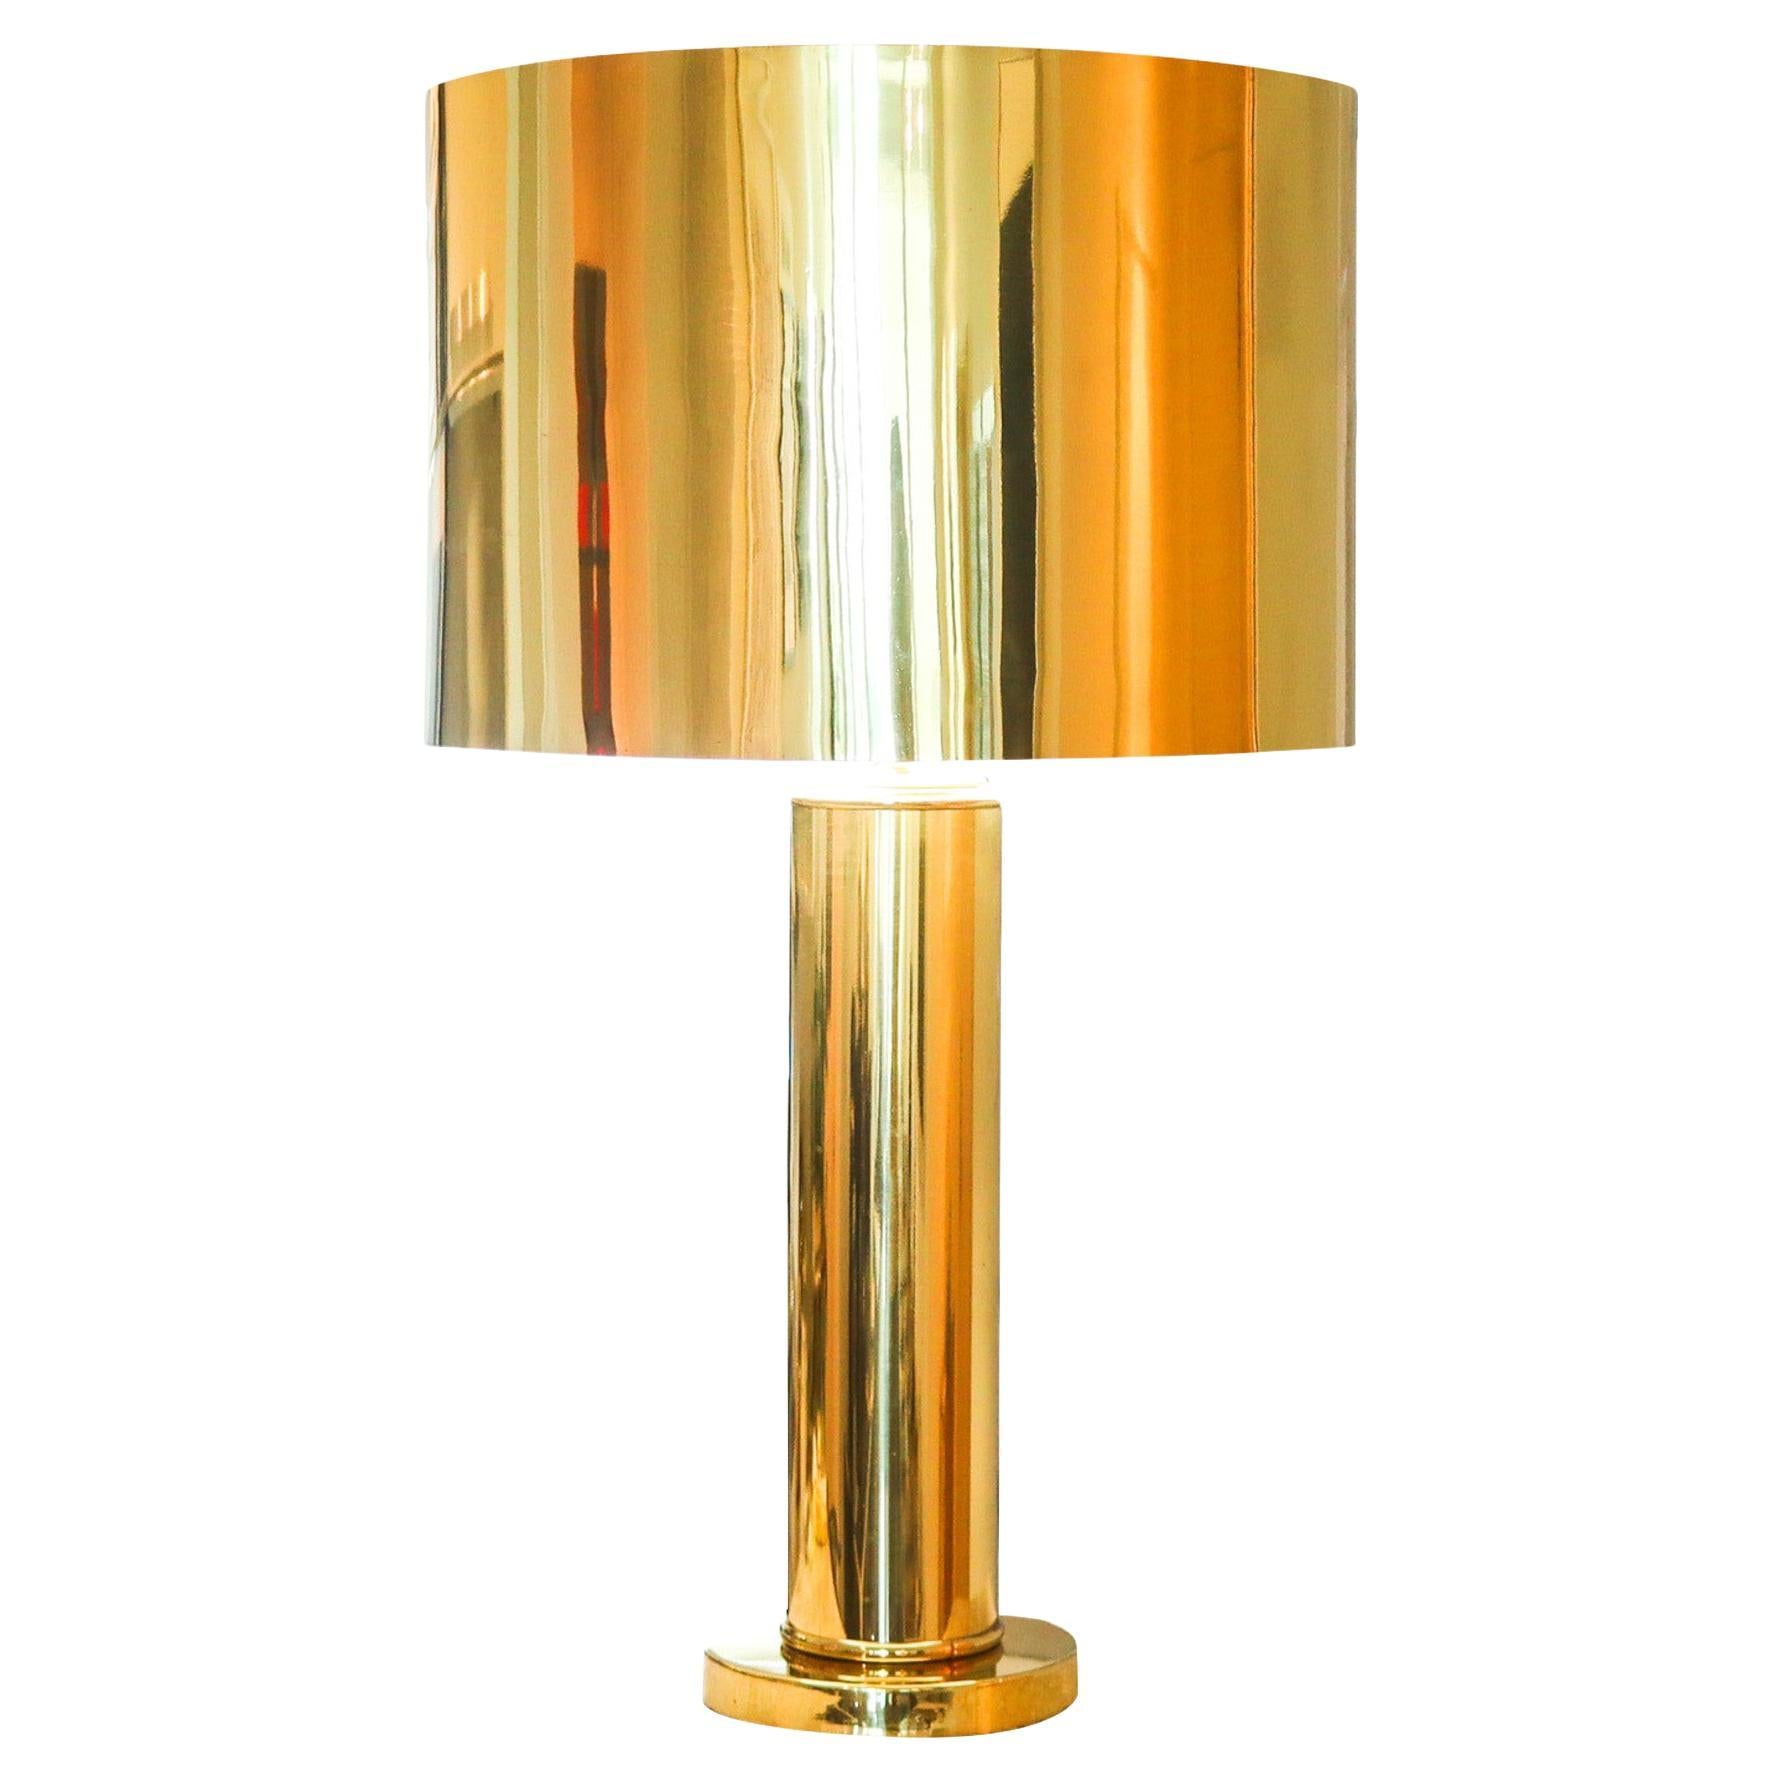 George Kovacs 1960 Mid Century Modern Large Desk-Table Lamp In Polished Brass